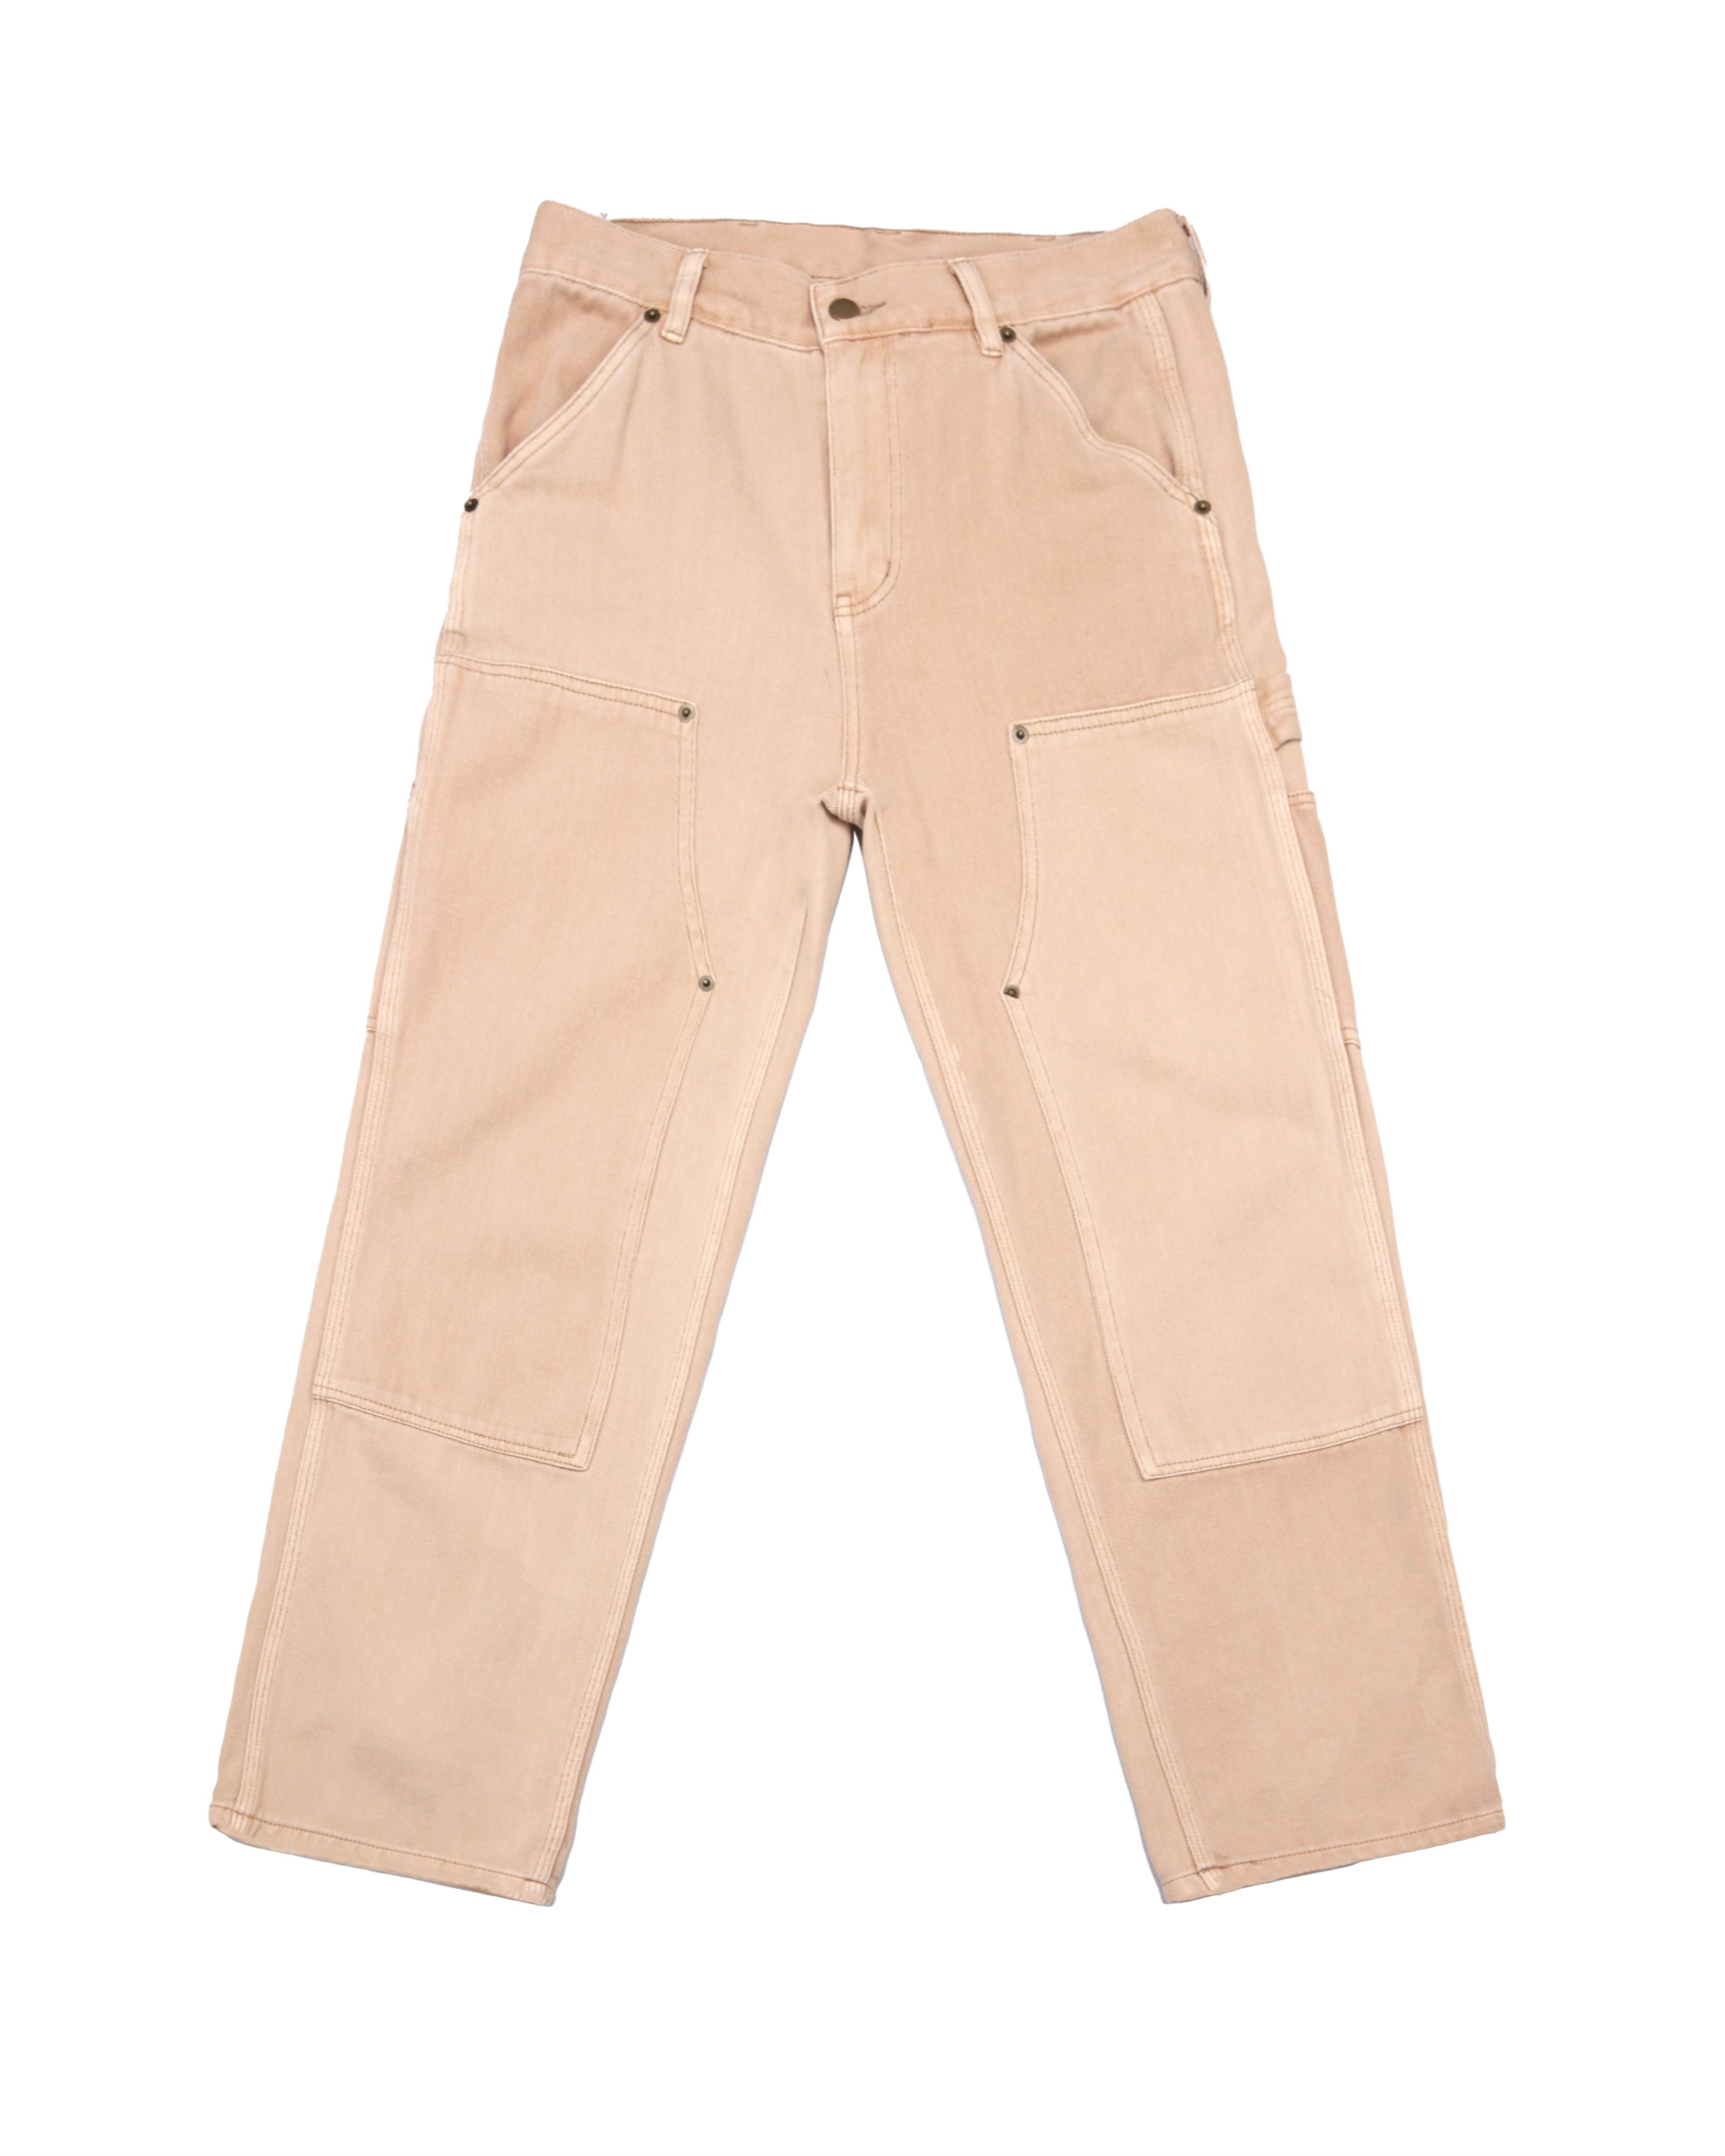 CARPENTER JEANS RELAXED FIT | BEIGE